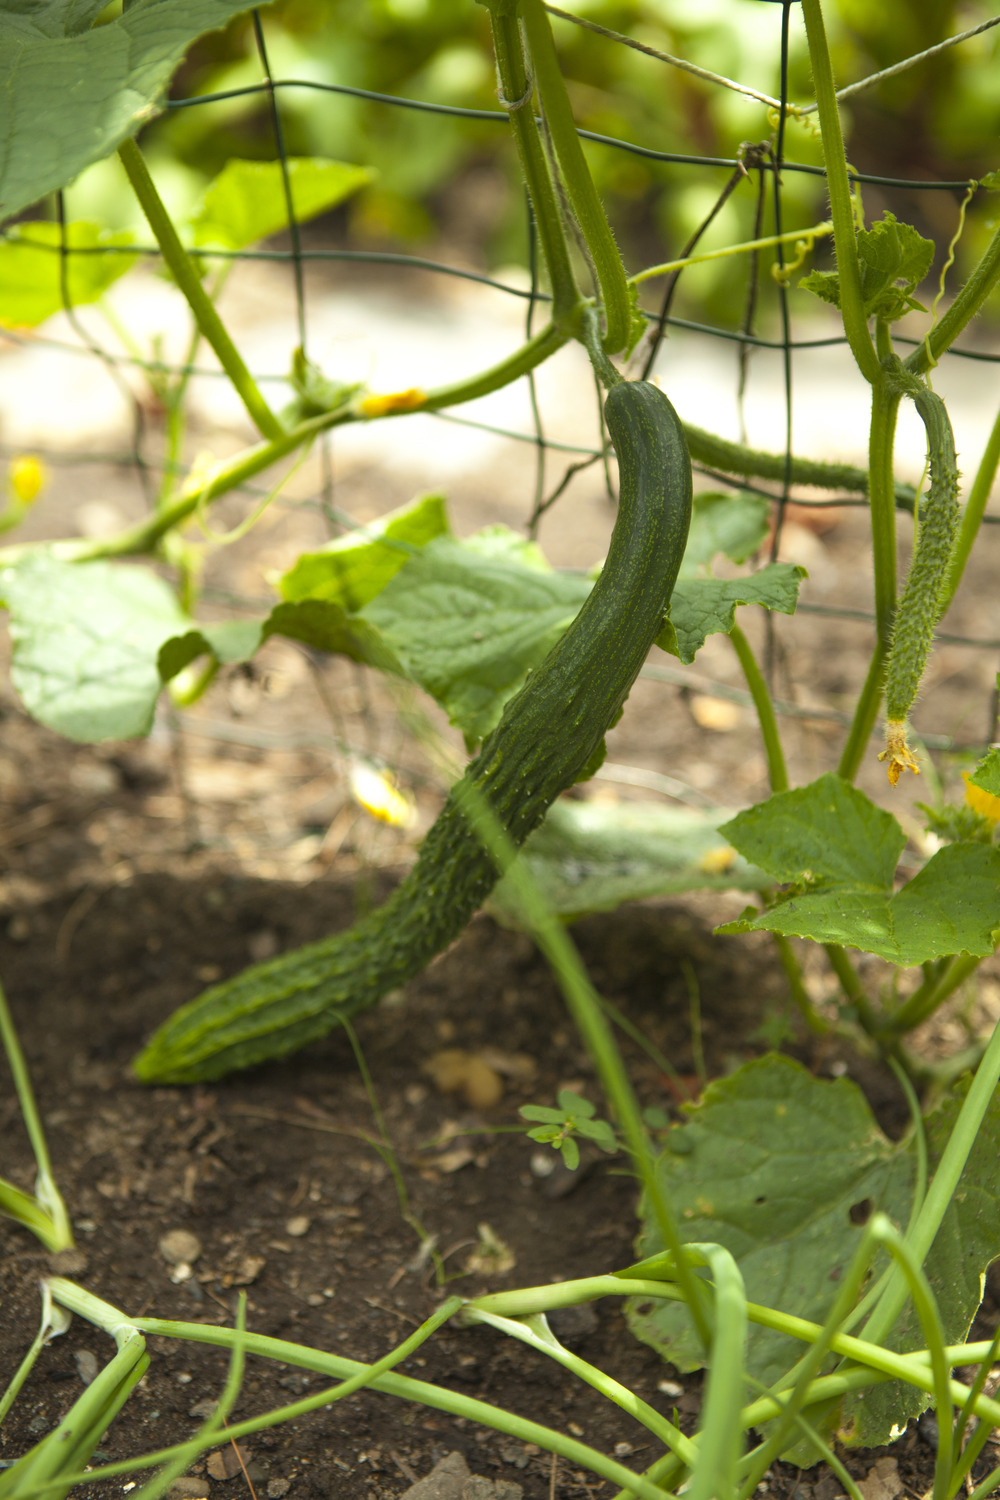 This Suyo cucumber variety has been a heavy producer of 12